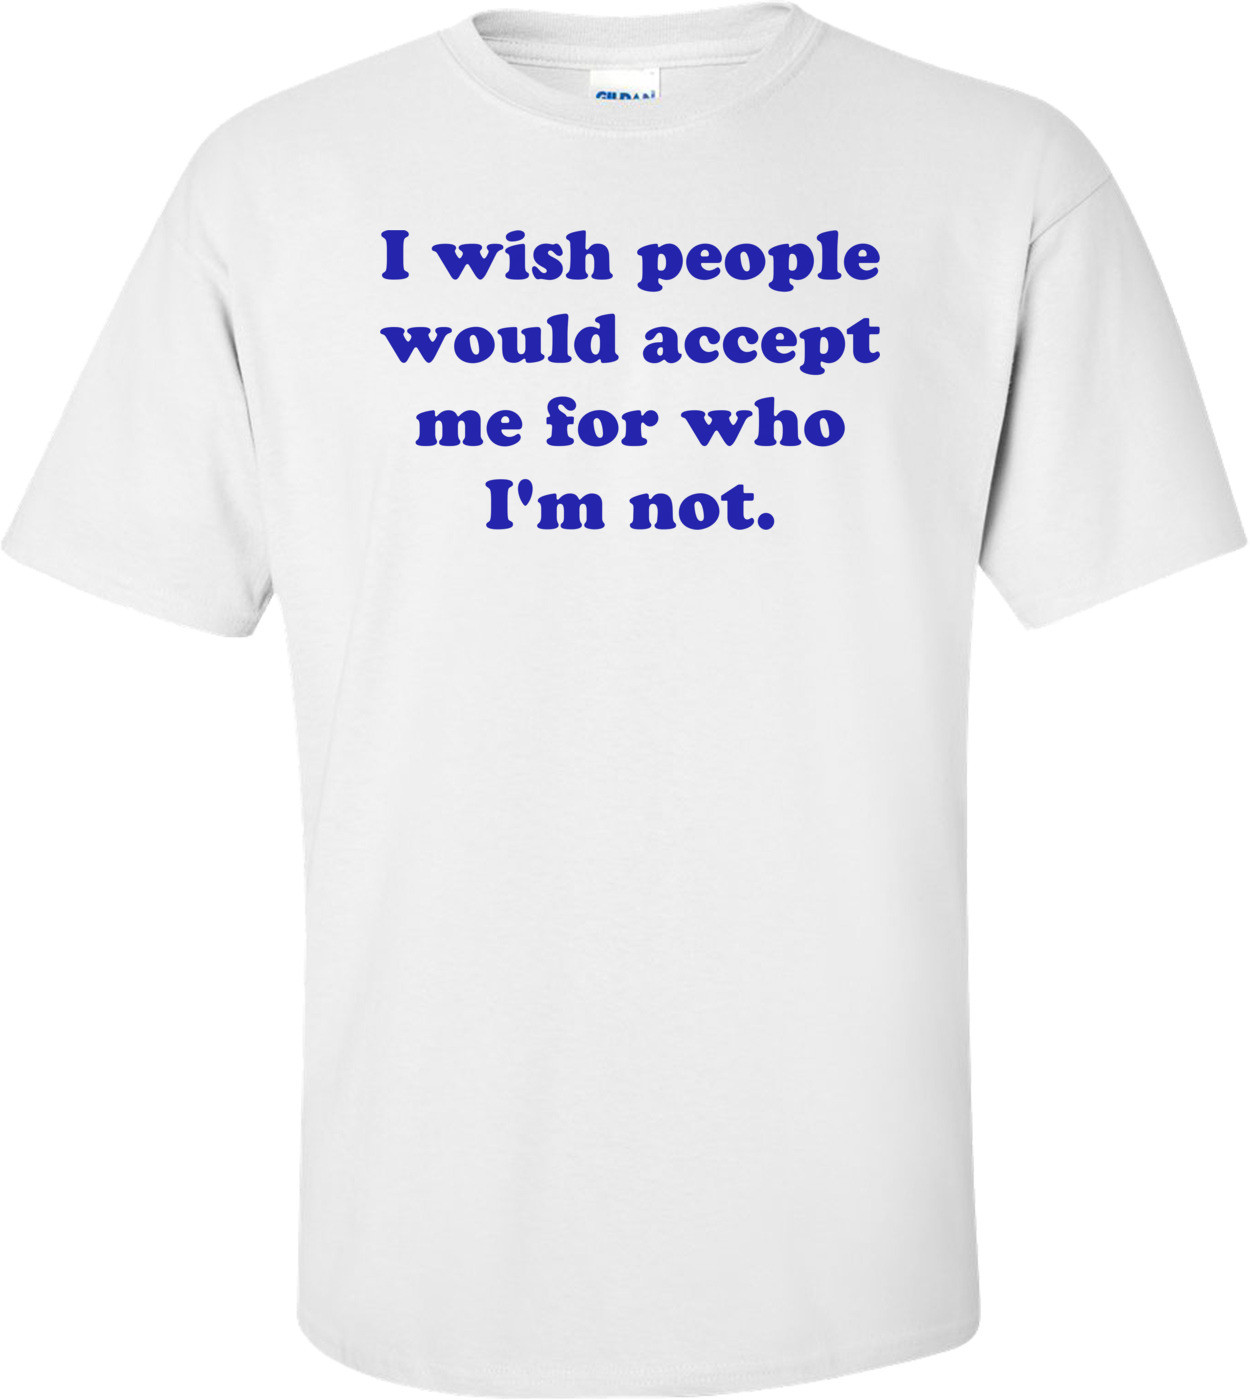 I wish people would accept me for who I'm not. Shirt